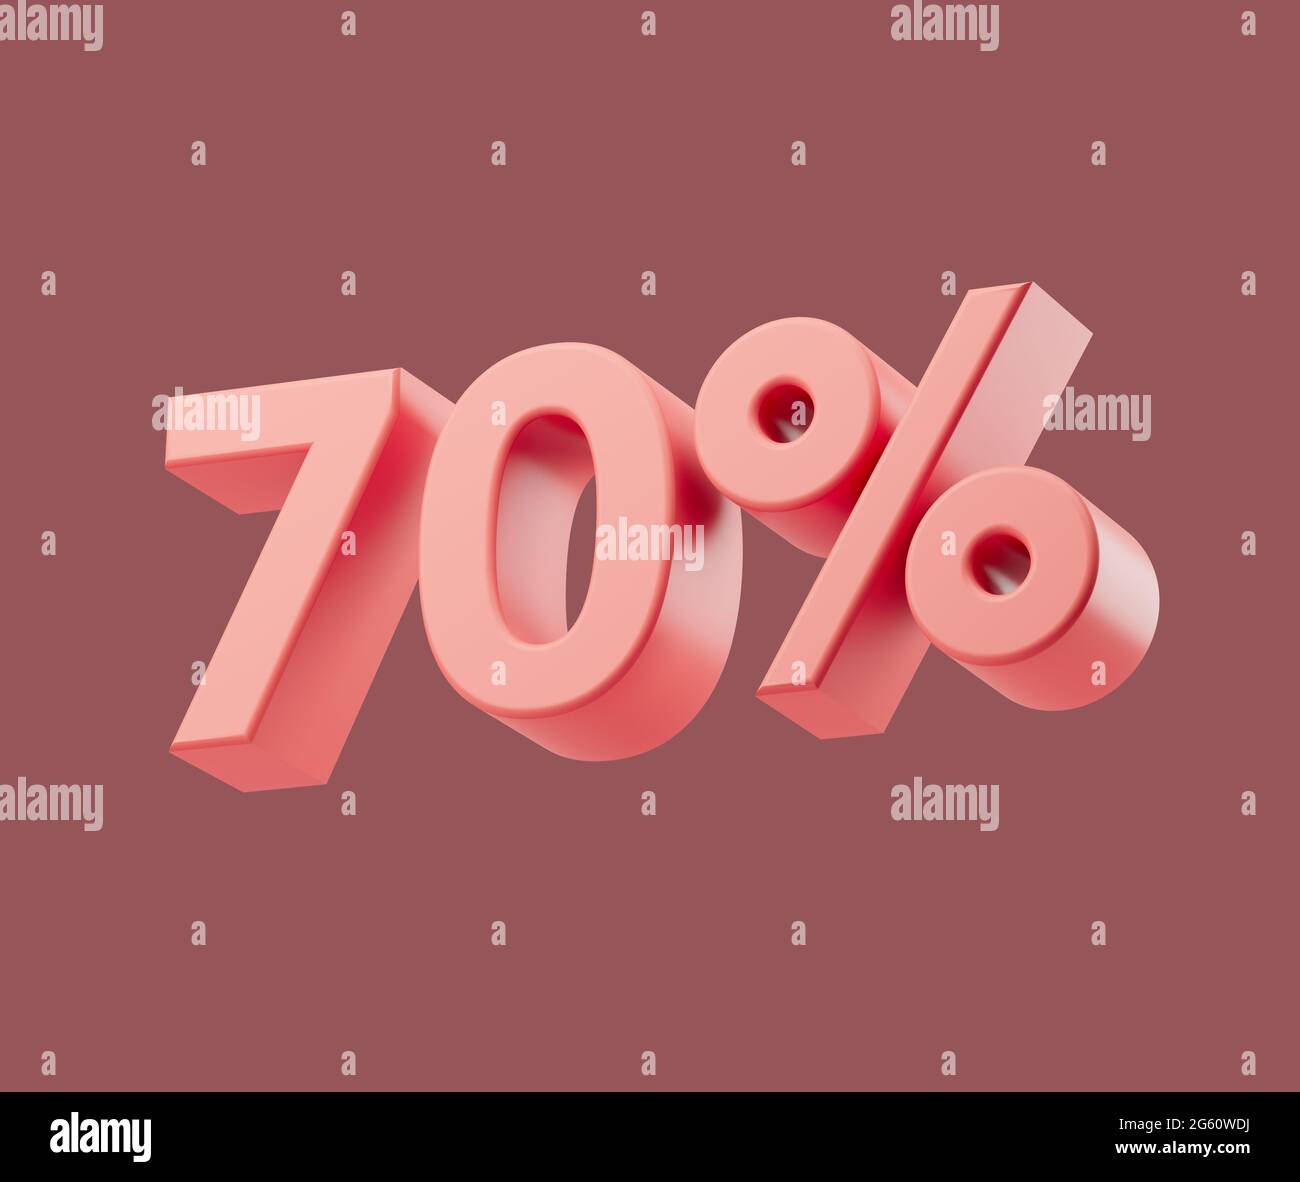 Sale 70 or seventy percent on pastel background. 3d render illustration. Isolated object with soft shadows Stock Photo